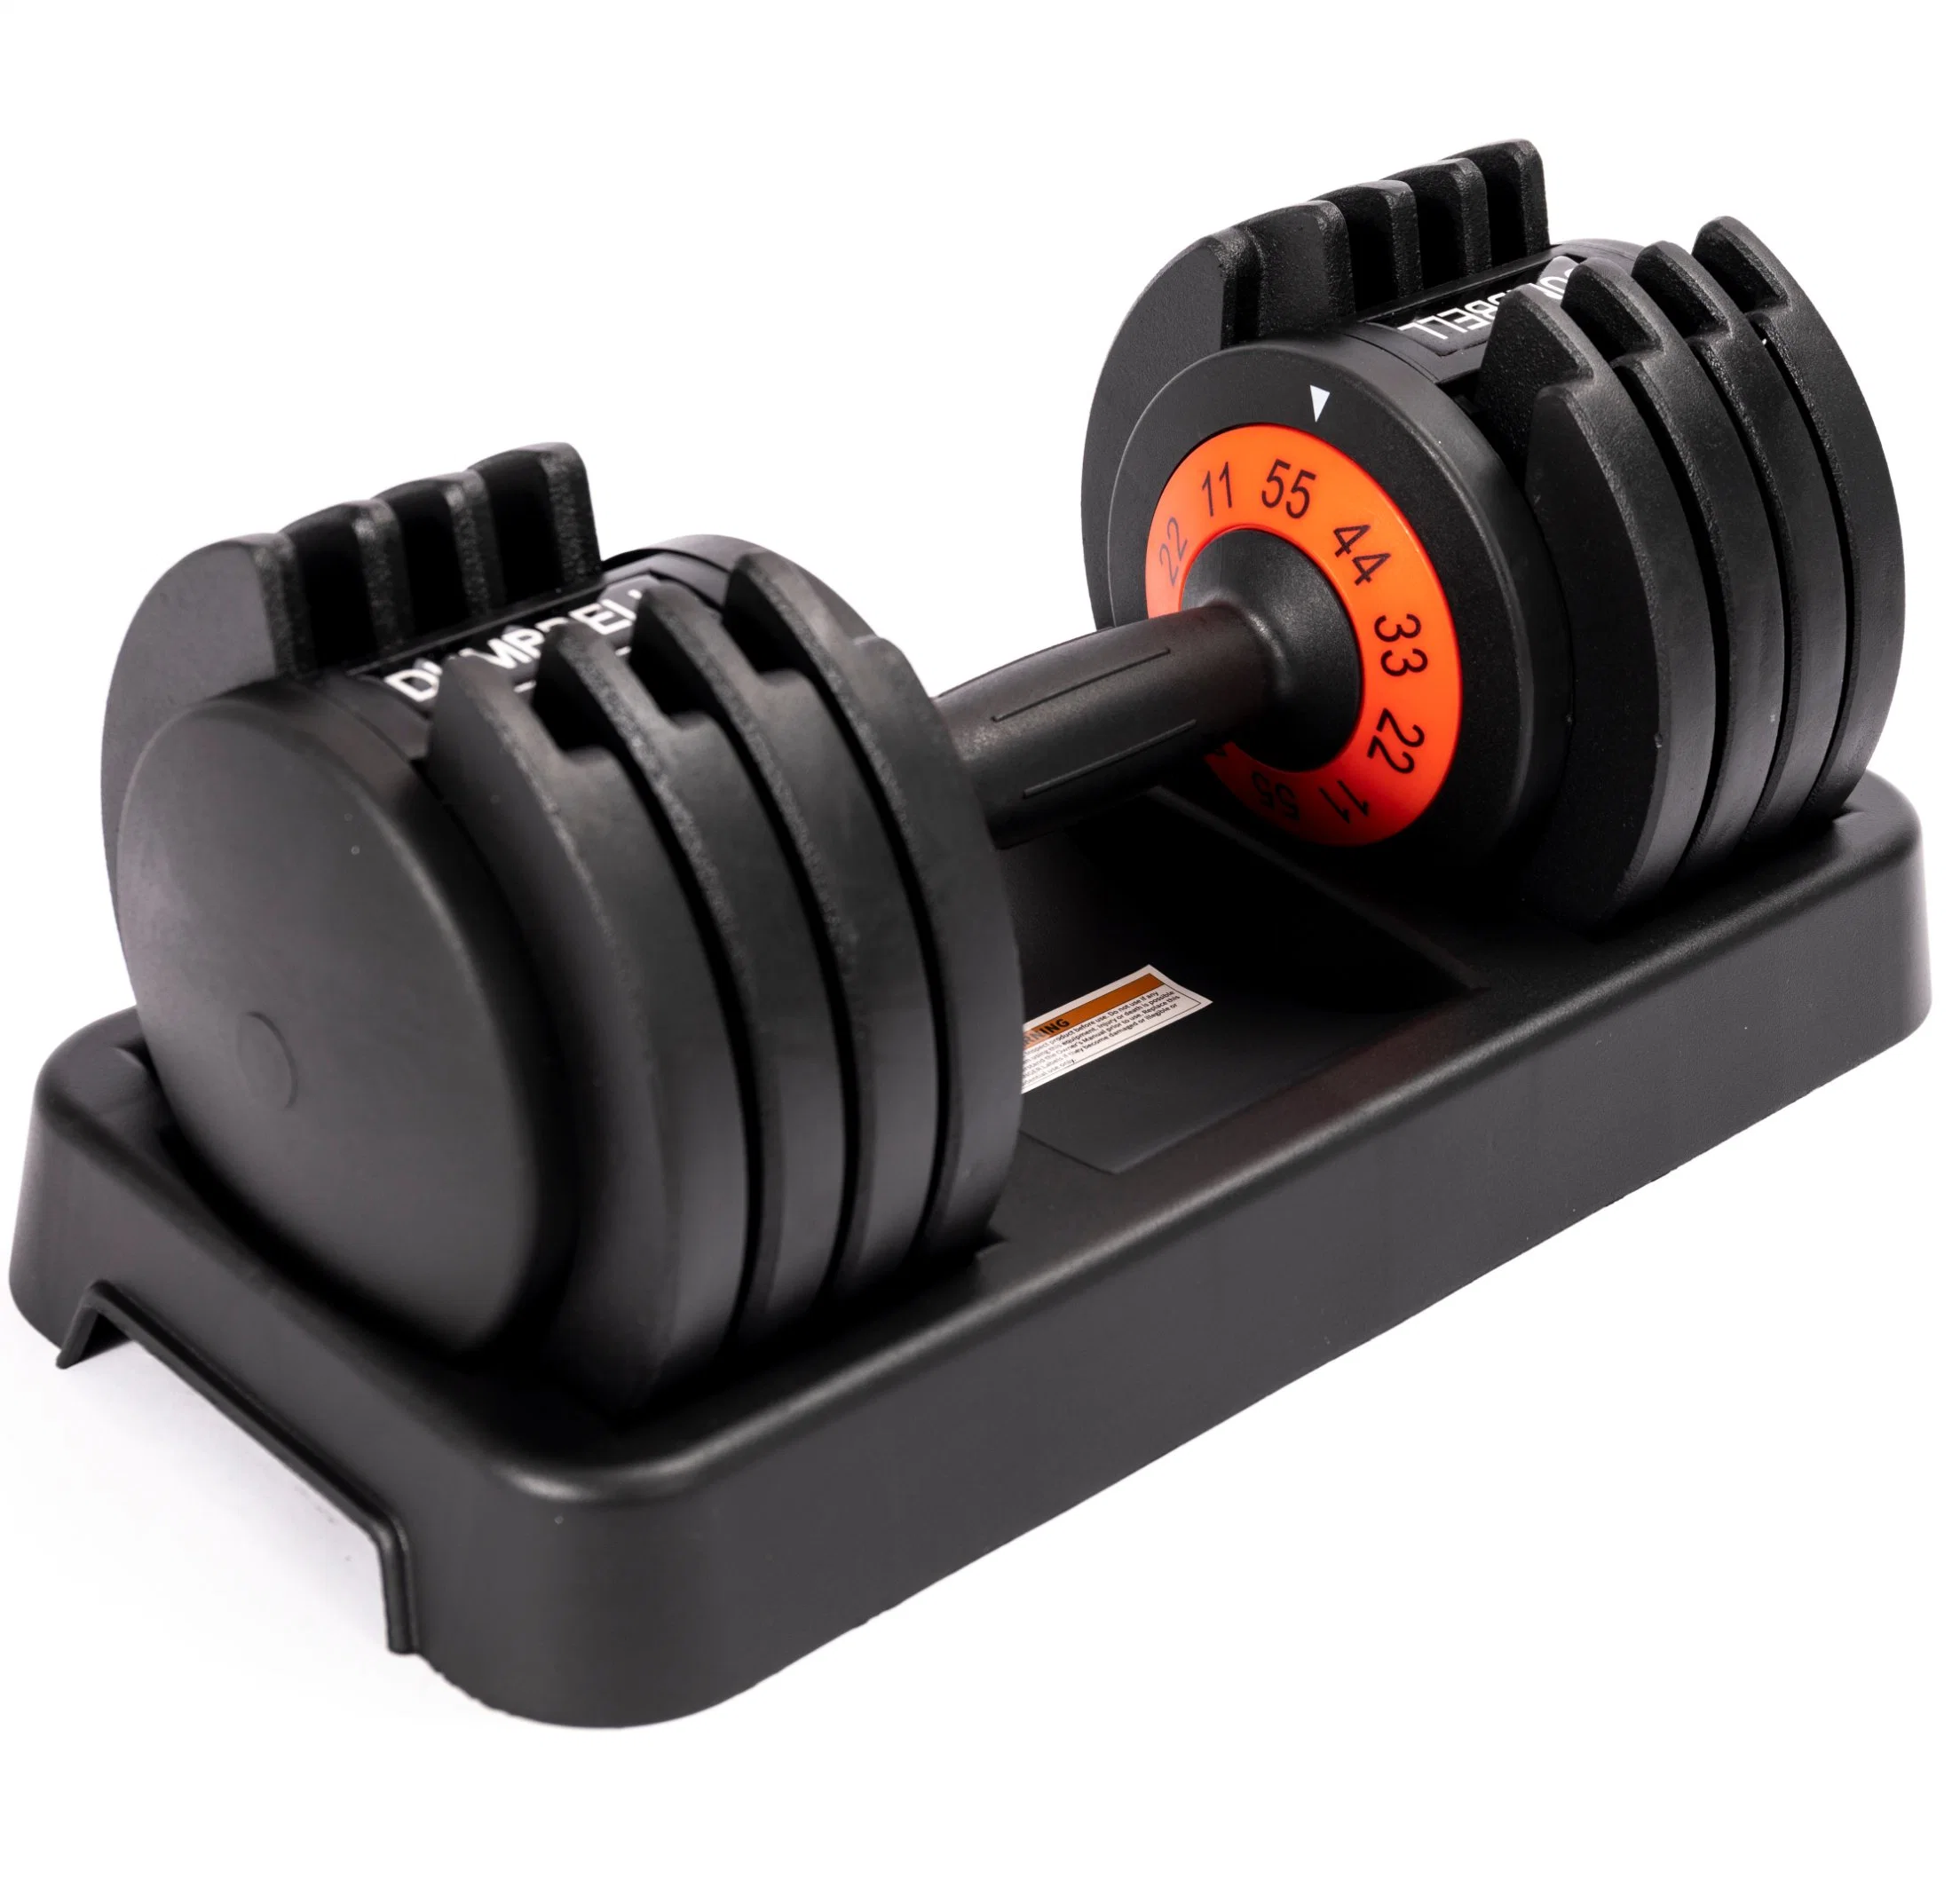 Todo Weight Adjustable Dumbbell Fitness Gym Dumbbell Set